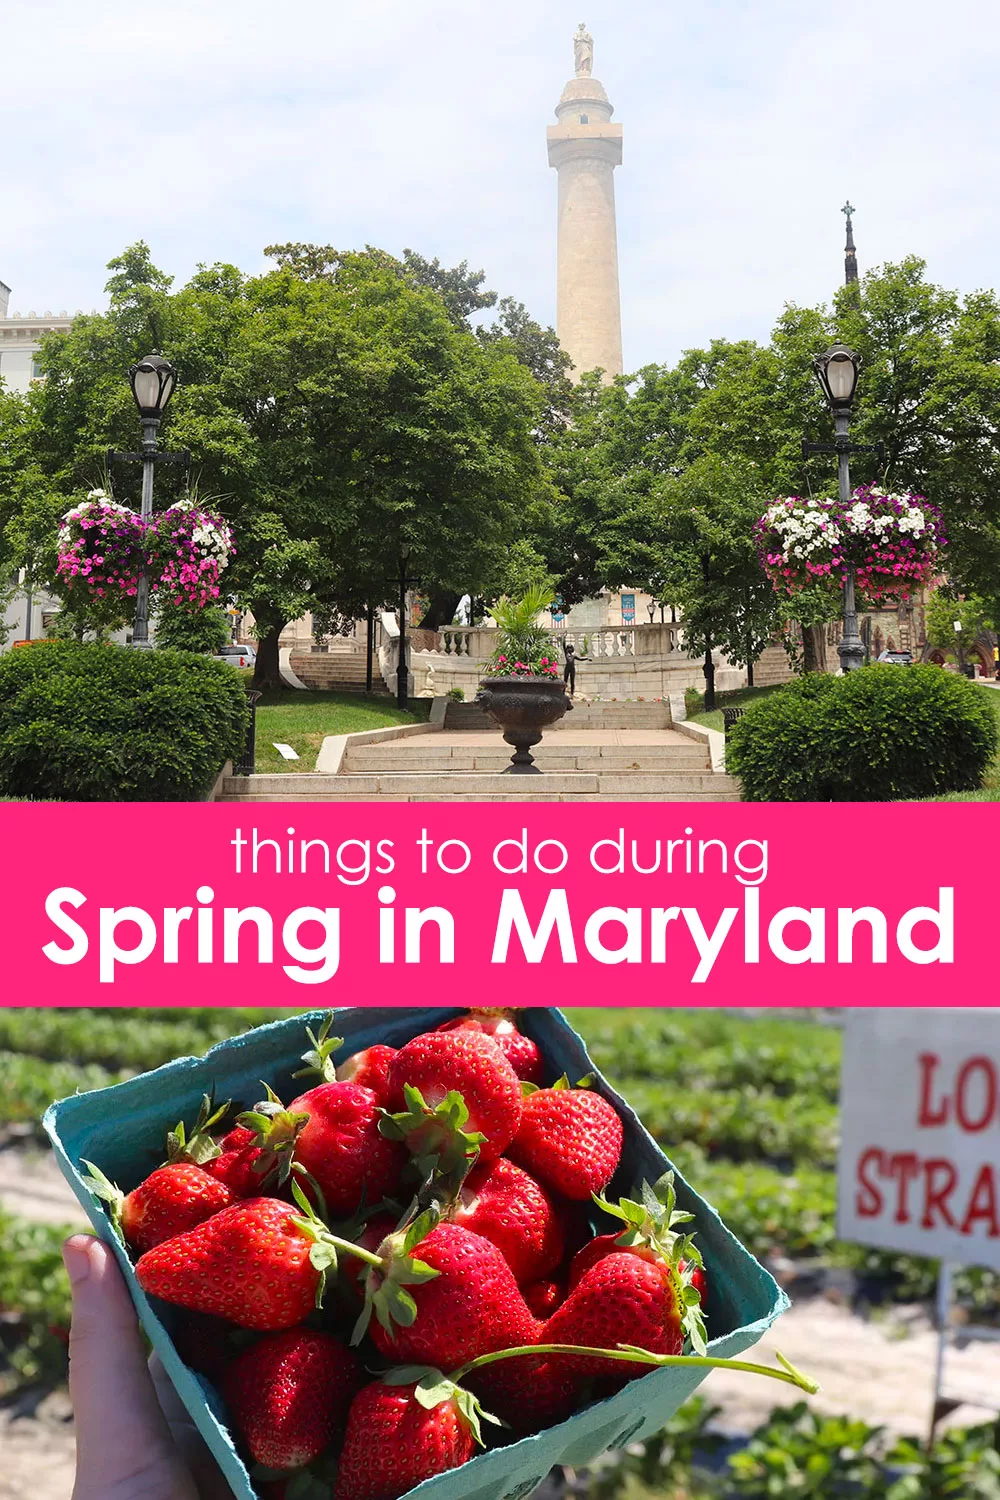 Things to Do During Spring in Maryland